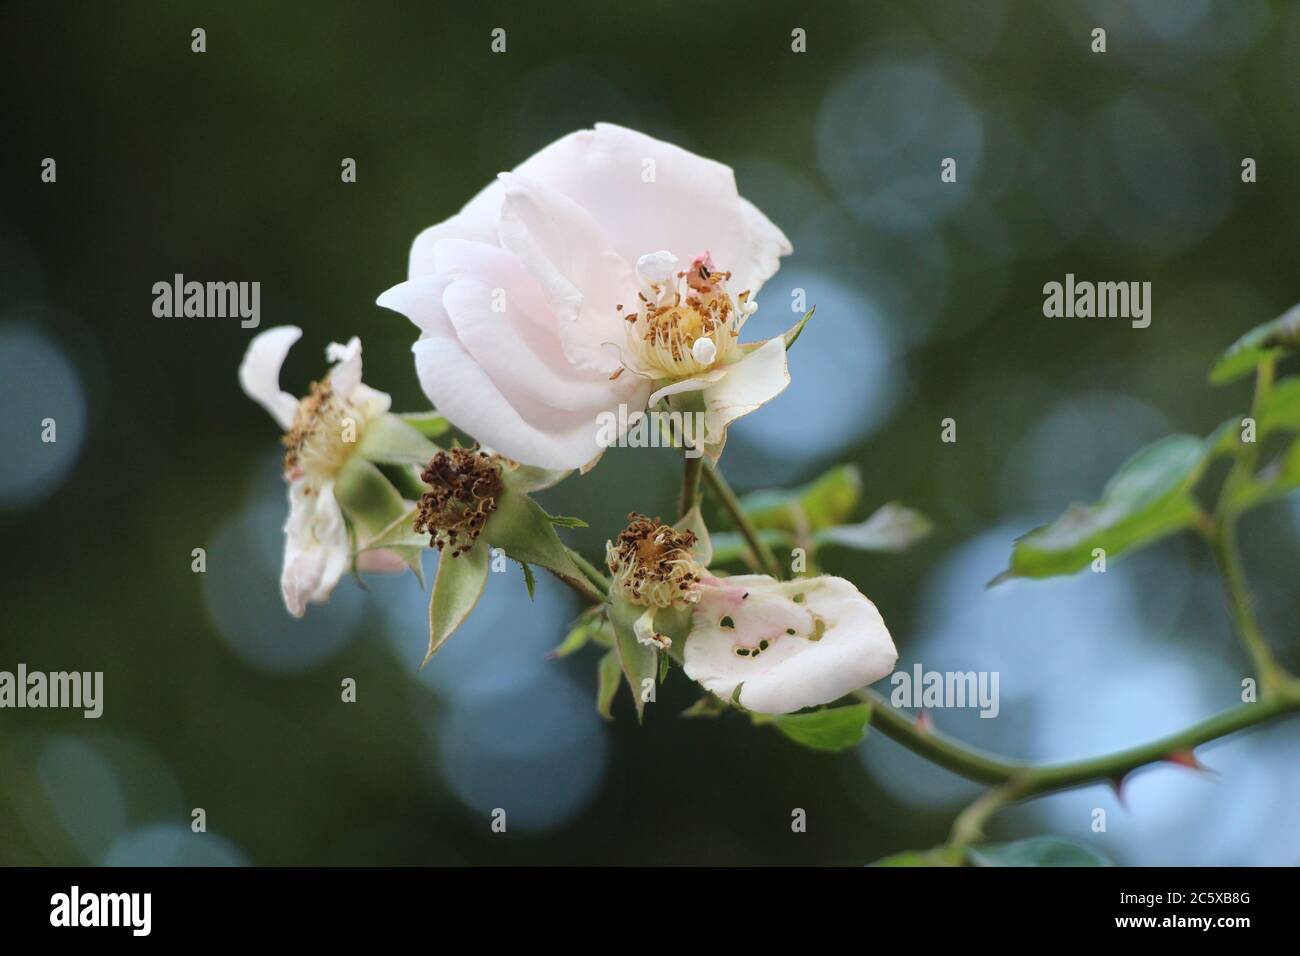 You can see a badly bitten pink rose petal with many holes through it among fading pink roses that are not intact Stock Photo